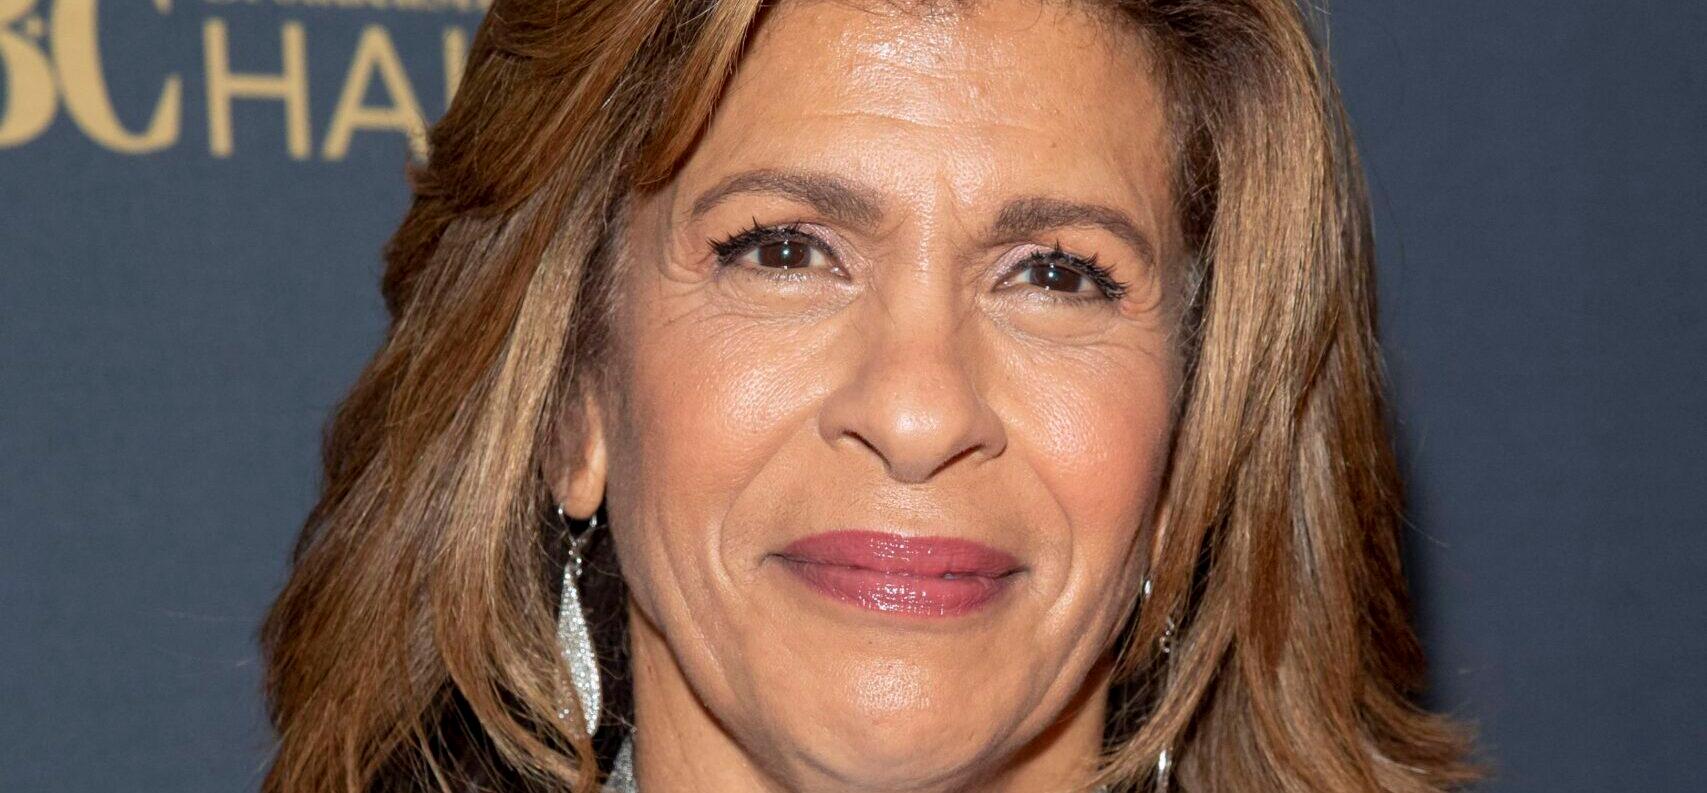 Hoda Kotb Suffers ‘Medical Emergency’ During The ‘Today’ Show